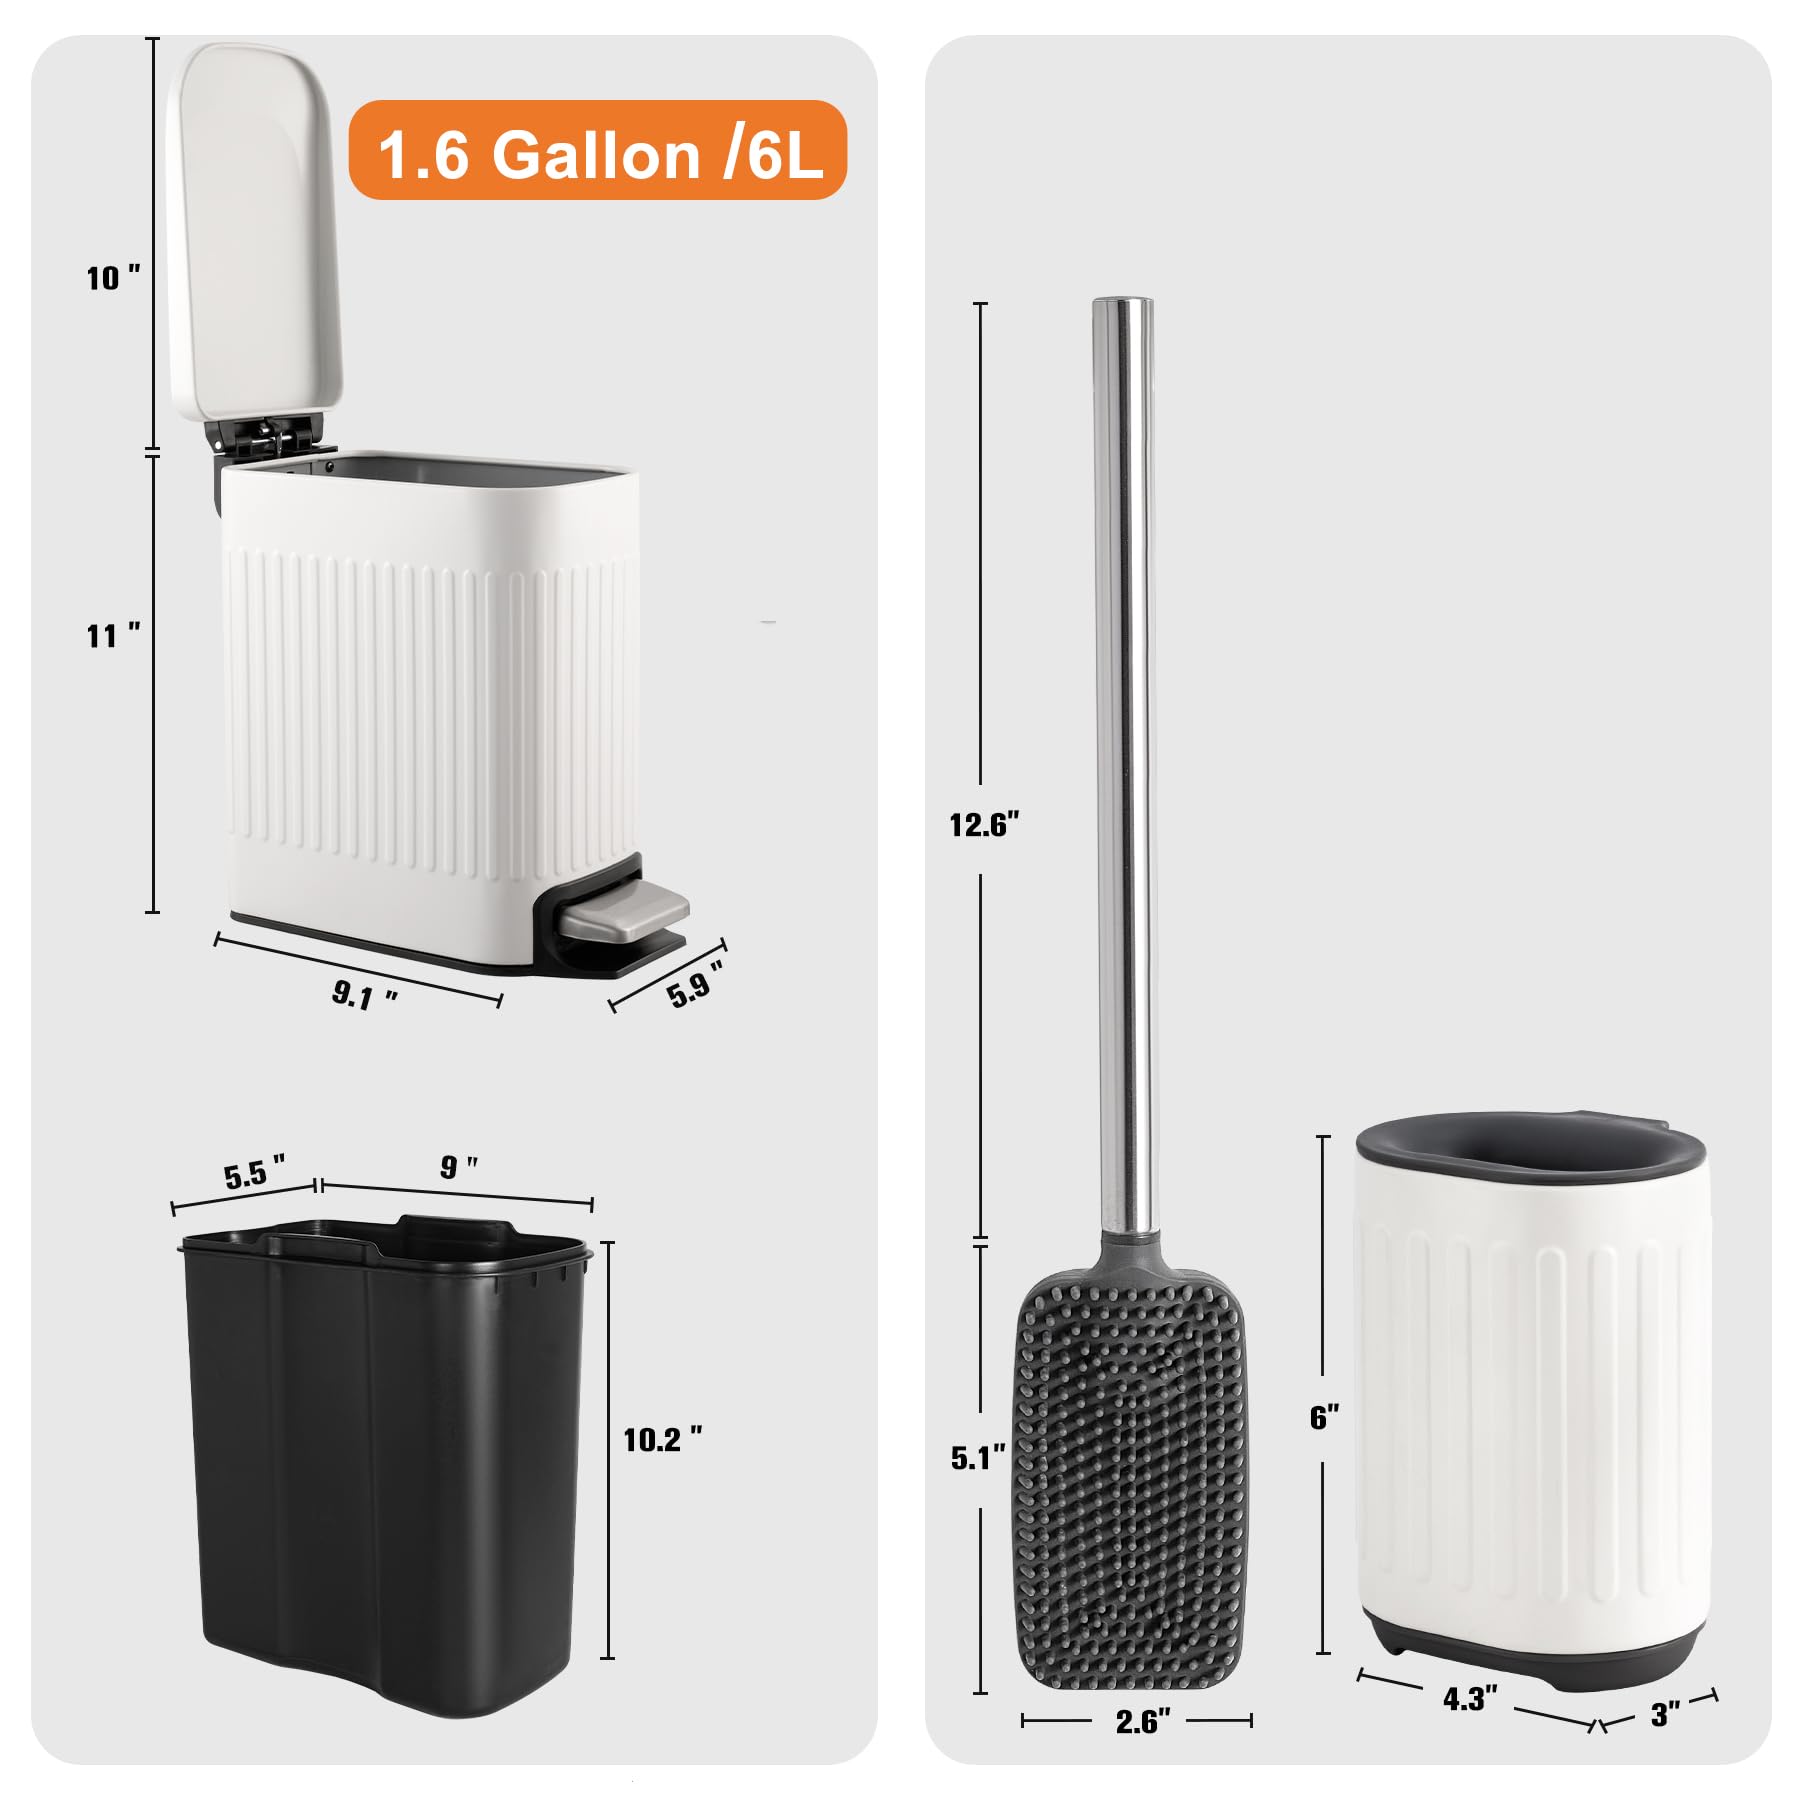 Bathroom Trash Can with Toilet Brush - 1.6 Gallon Slim Stainless Steel Garbage Can, Small Wastebasket for Bathroom, Office, Bedroom, Silicone Toilet Brush Included, White